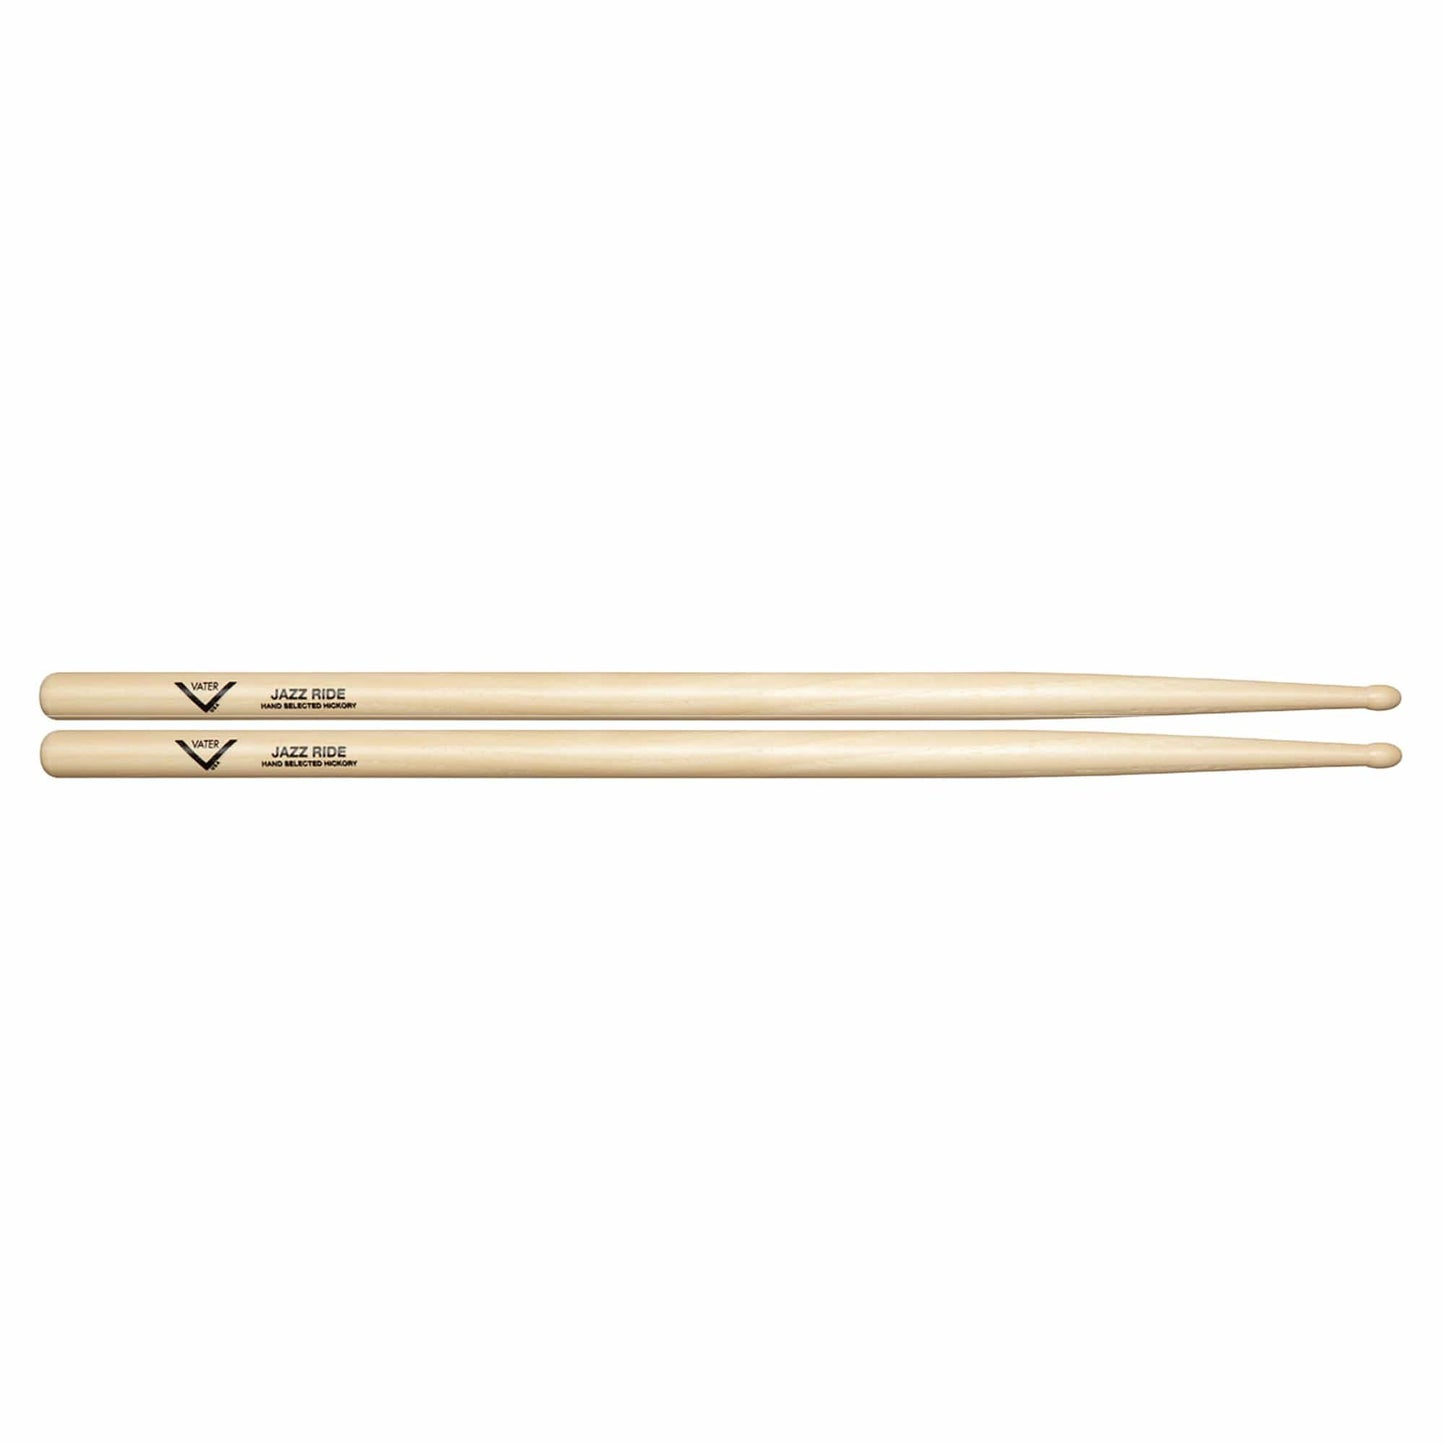 Vater Hickory Jazz Ride Wood Tip Drum Sticks Drums and Percussion / Parts and Accessories / Drum Sticks and Mallets